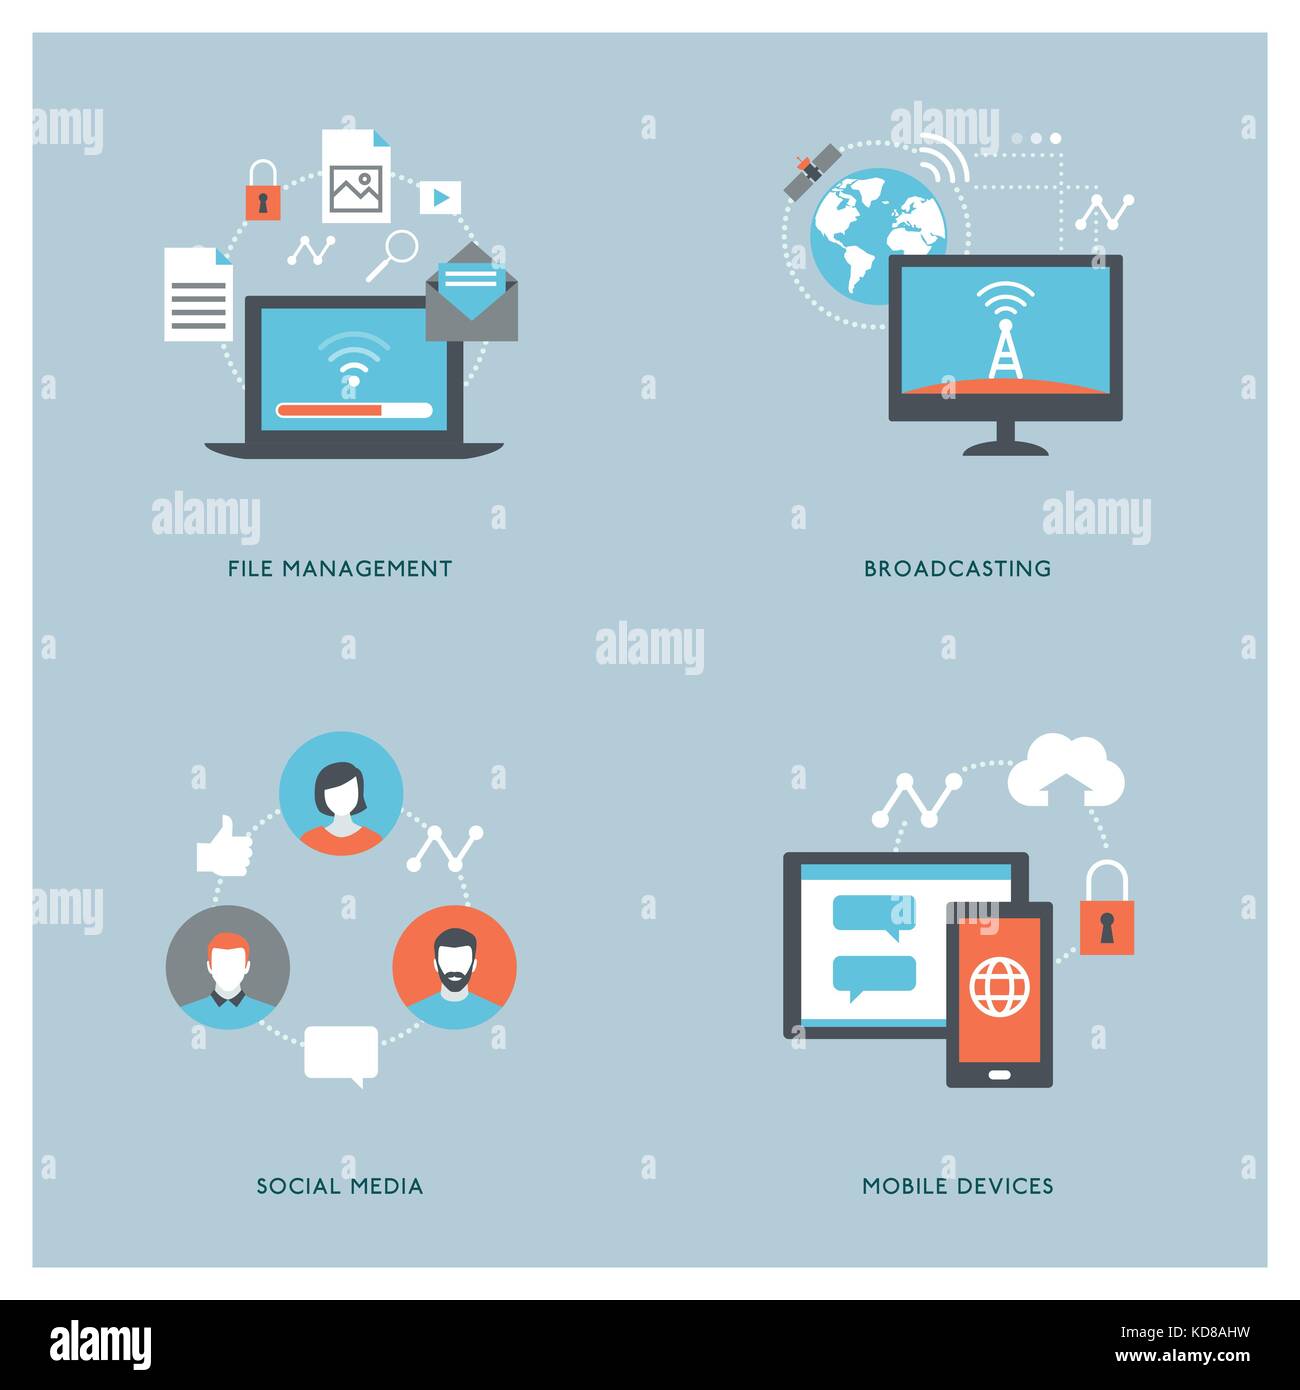 Internet, computers, mobile devices and social media concepts with icons Stock Vector